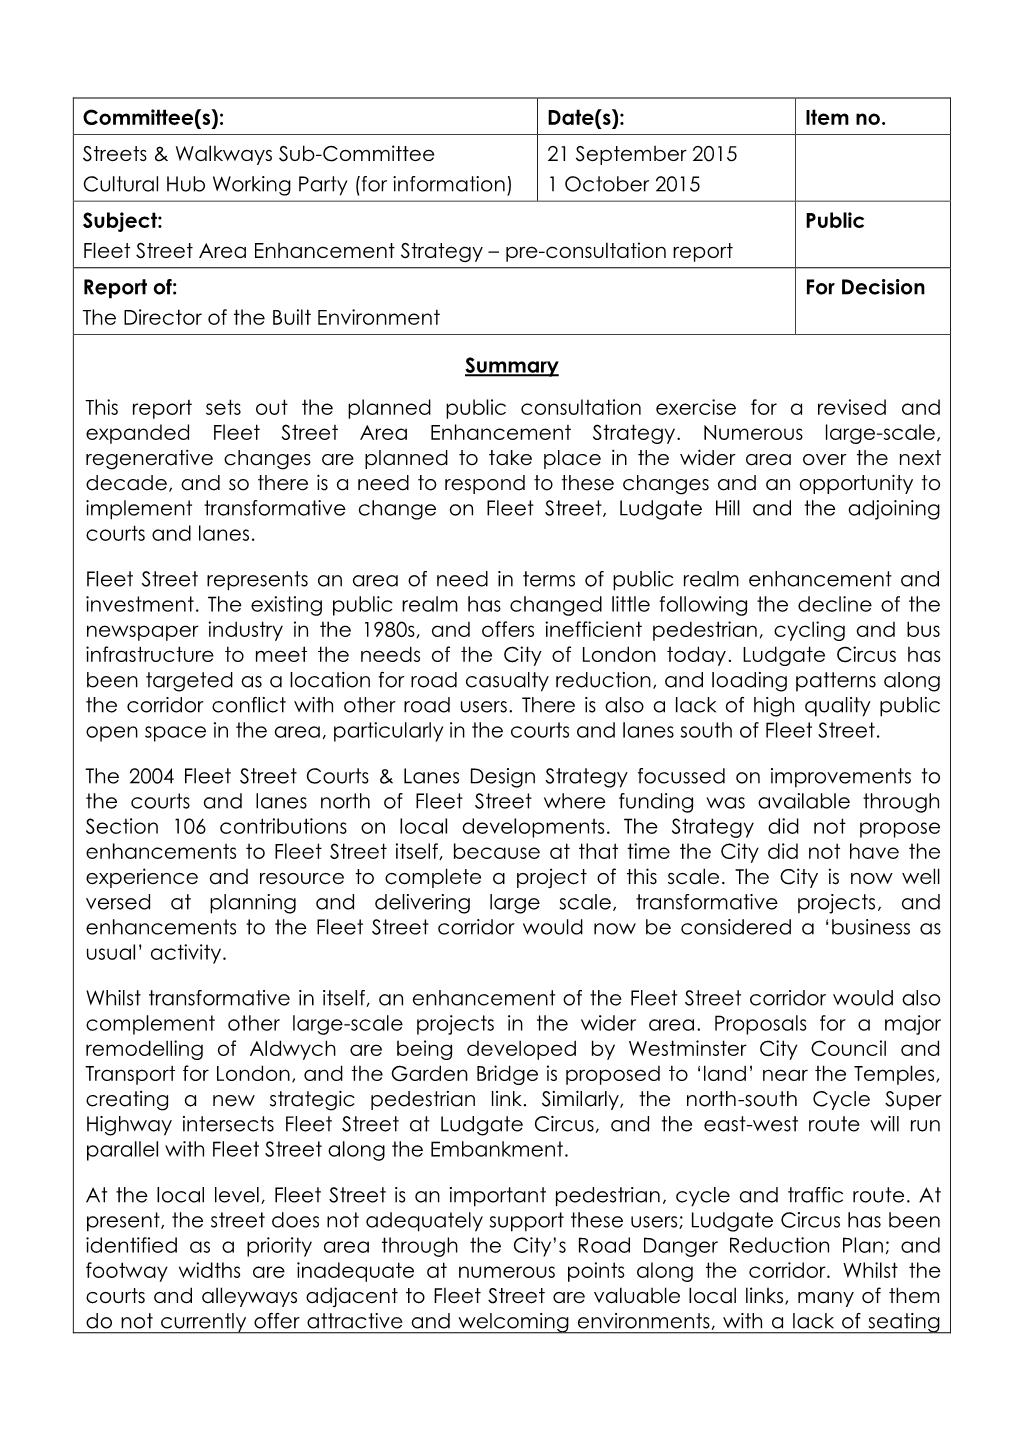 Fleet Street Area Enhancement Strategy – Pre-Consultation Report Report Of: for Decision the Director of the Built Environment